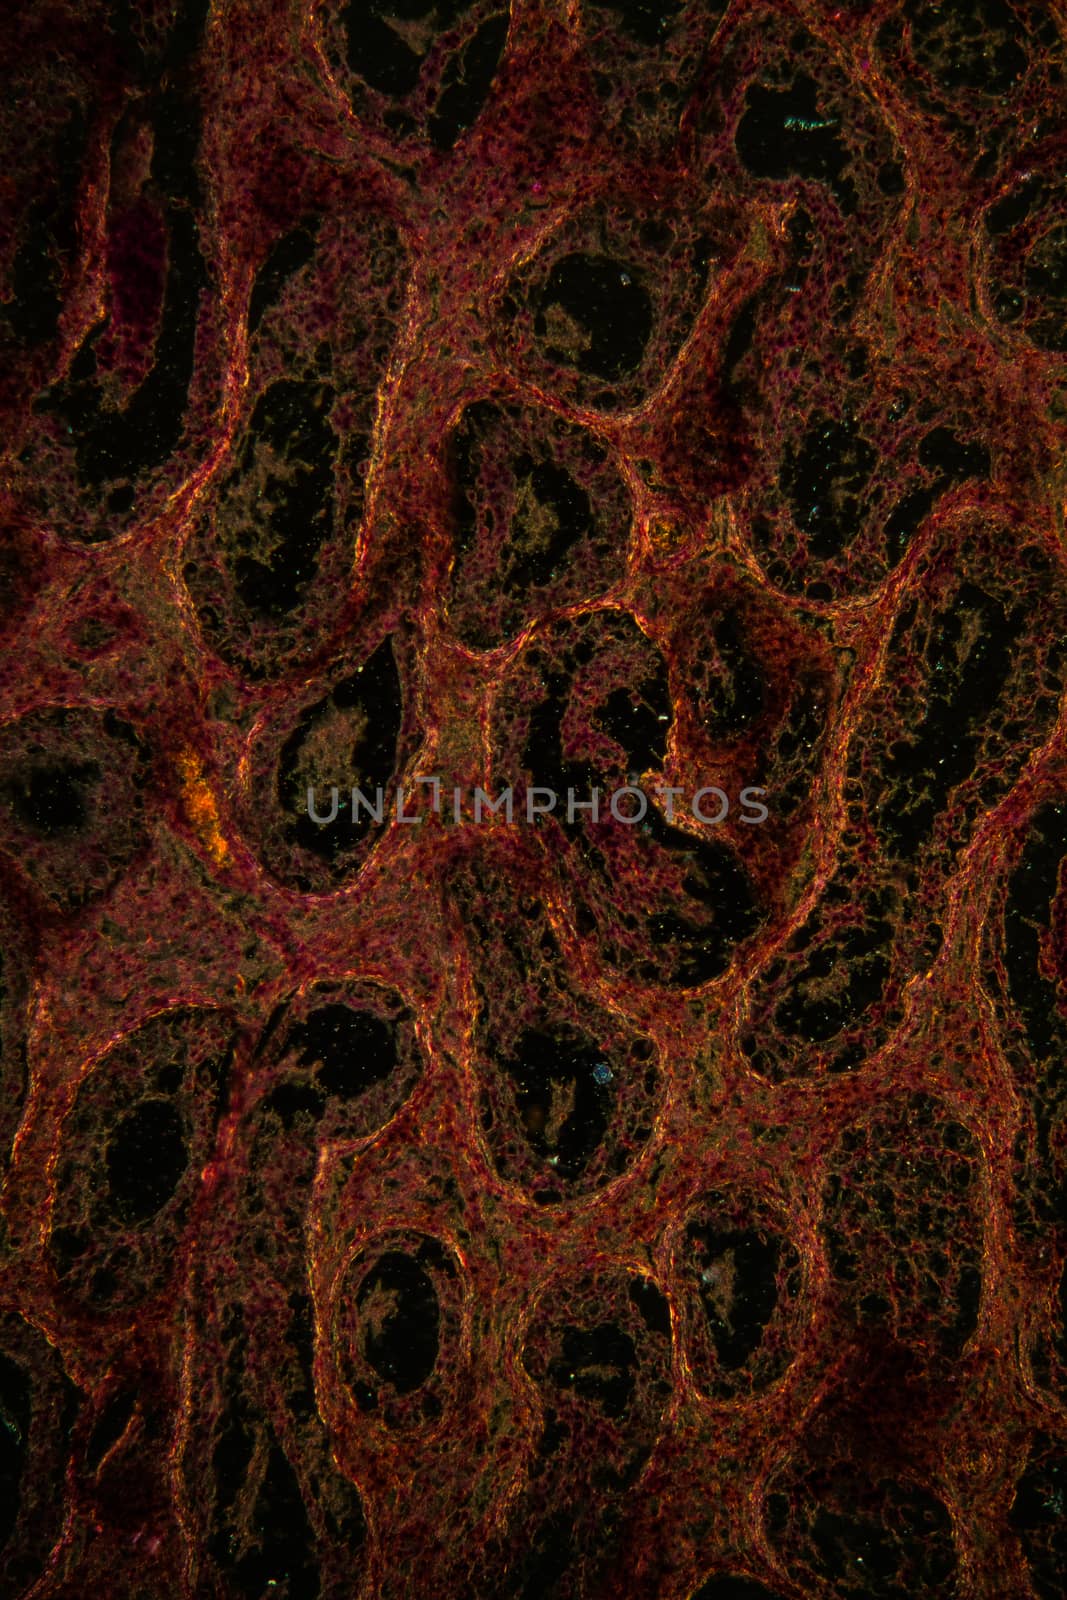 Inguinal testicle tissue under the microscope 100x by Dr-Lange